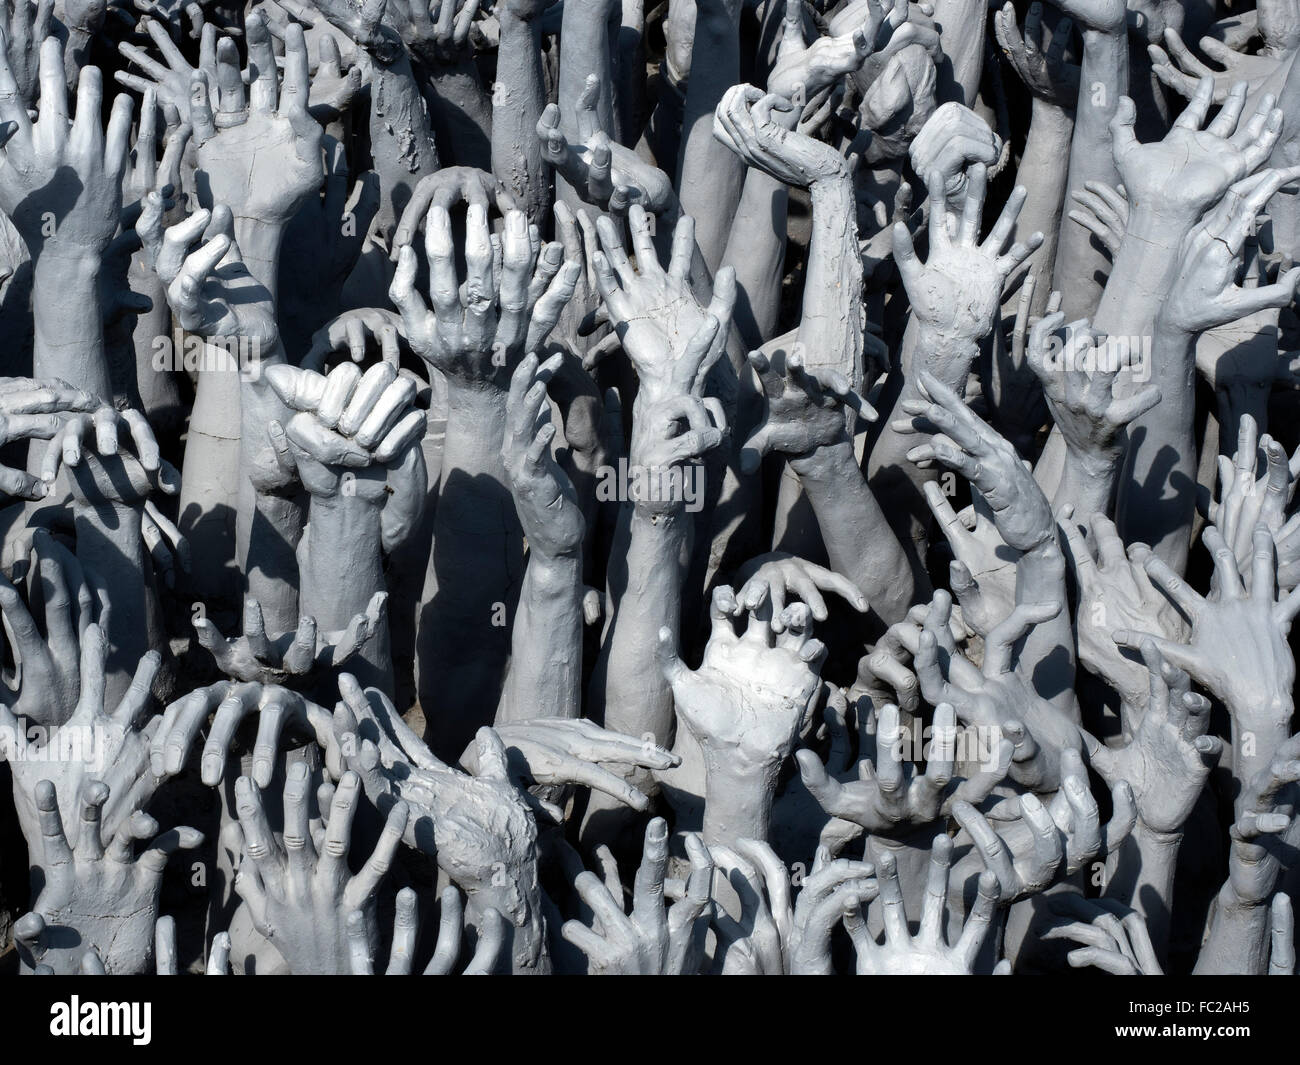 Representation of hell, hands pleading for help, entrance to white temple, Wat Rong Khun, Chiang Rai, Thailand Stock Photo